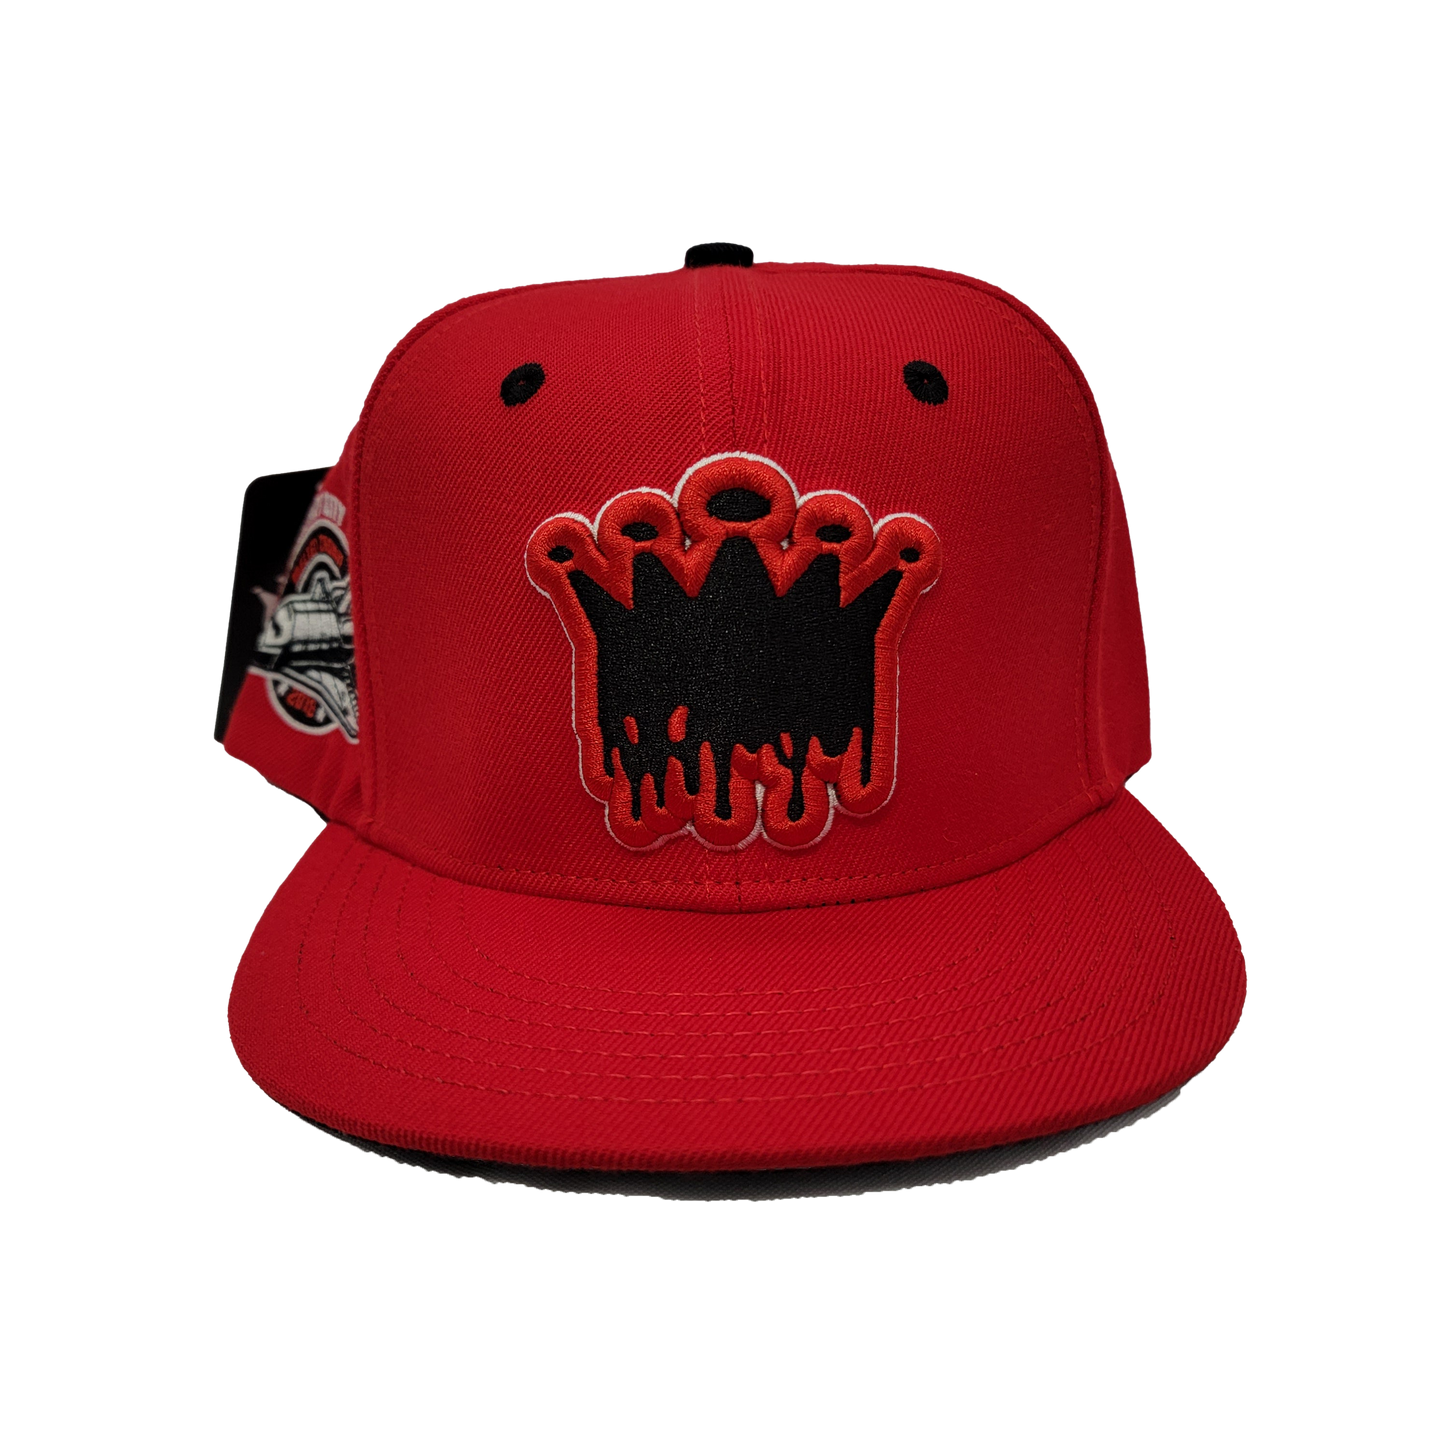 MC Rocket City Takeover Snapback Red Hat